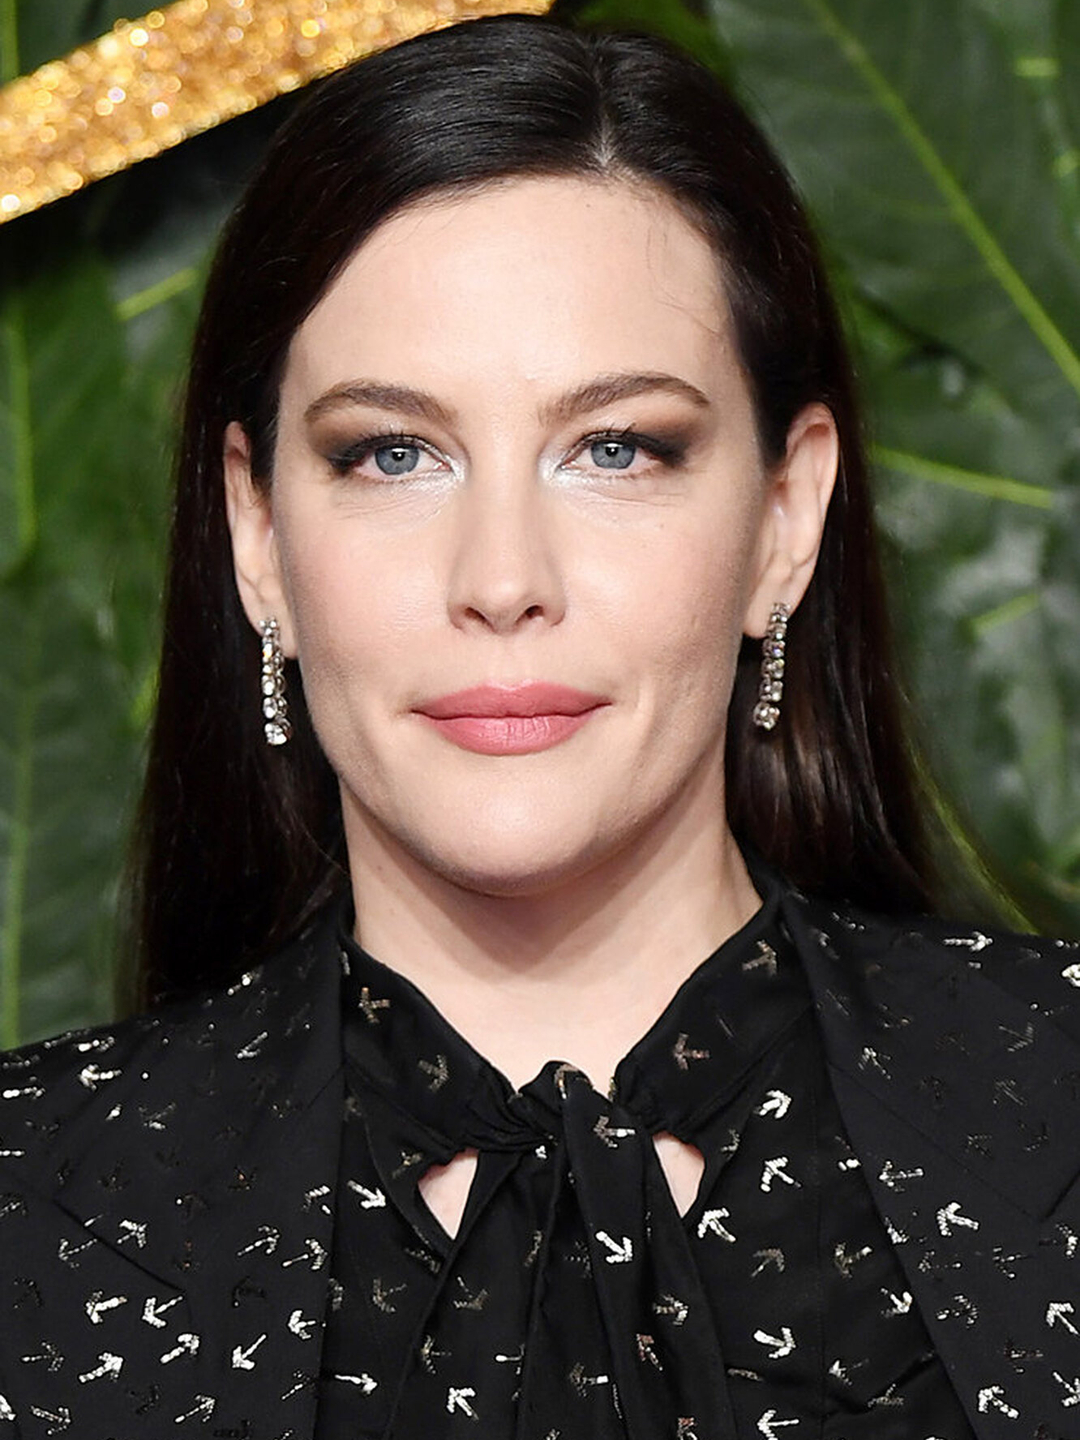 Liv Tyler who are her parents